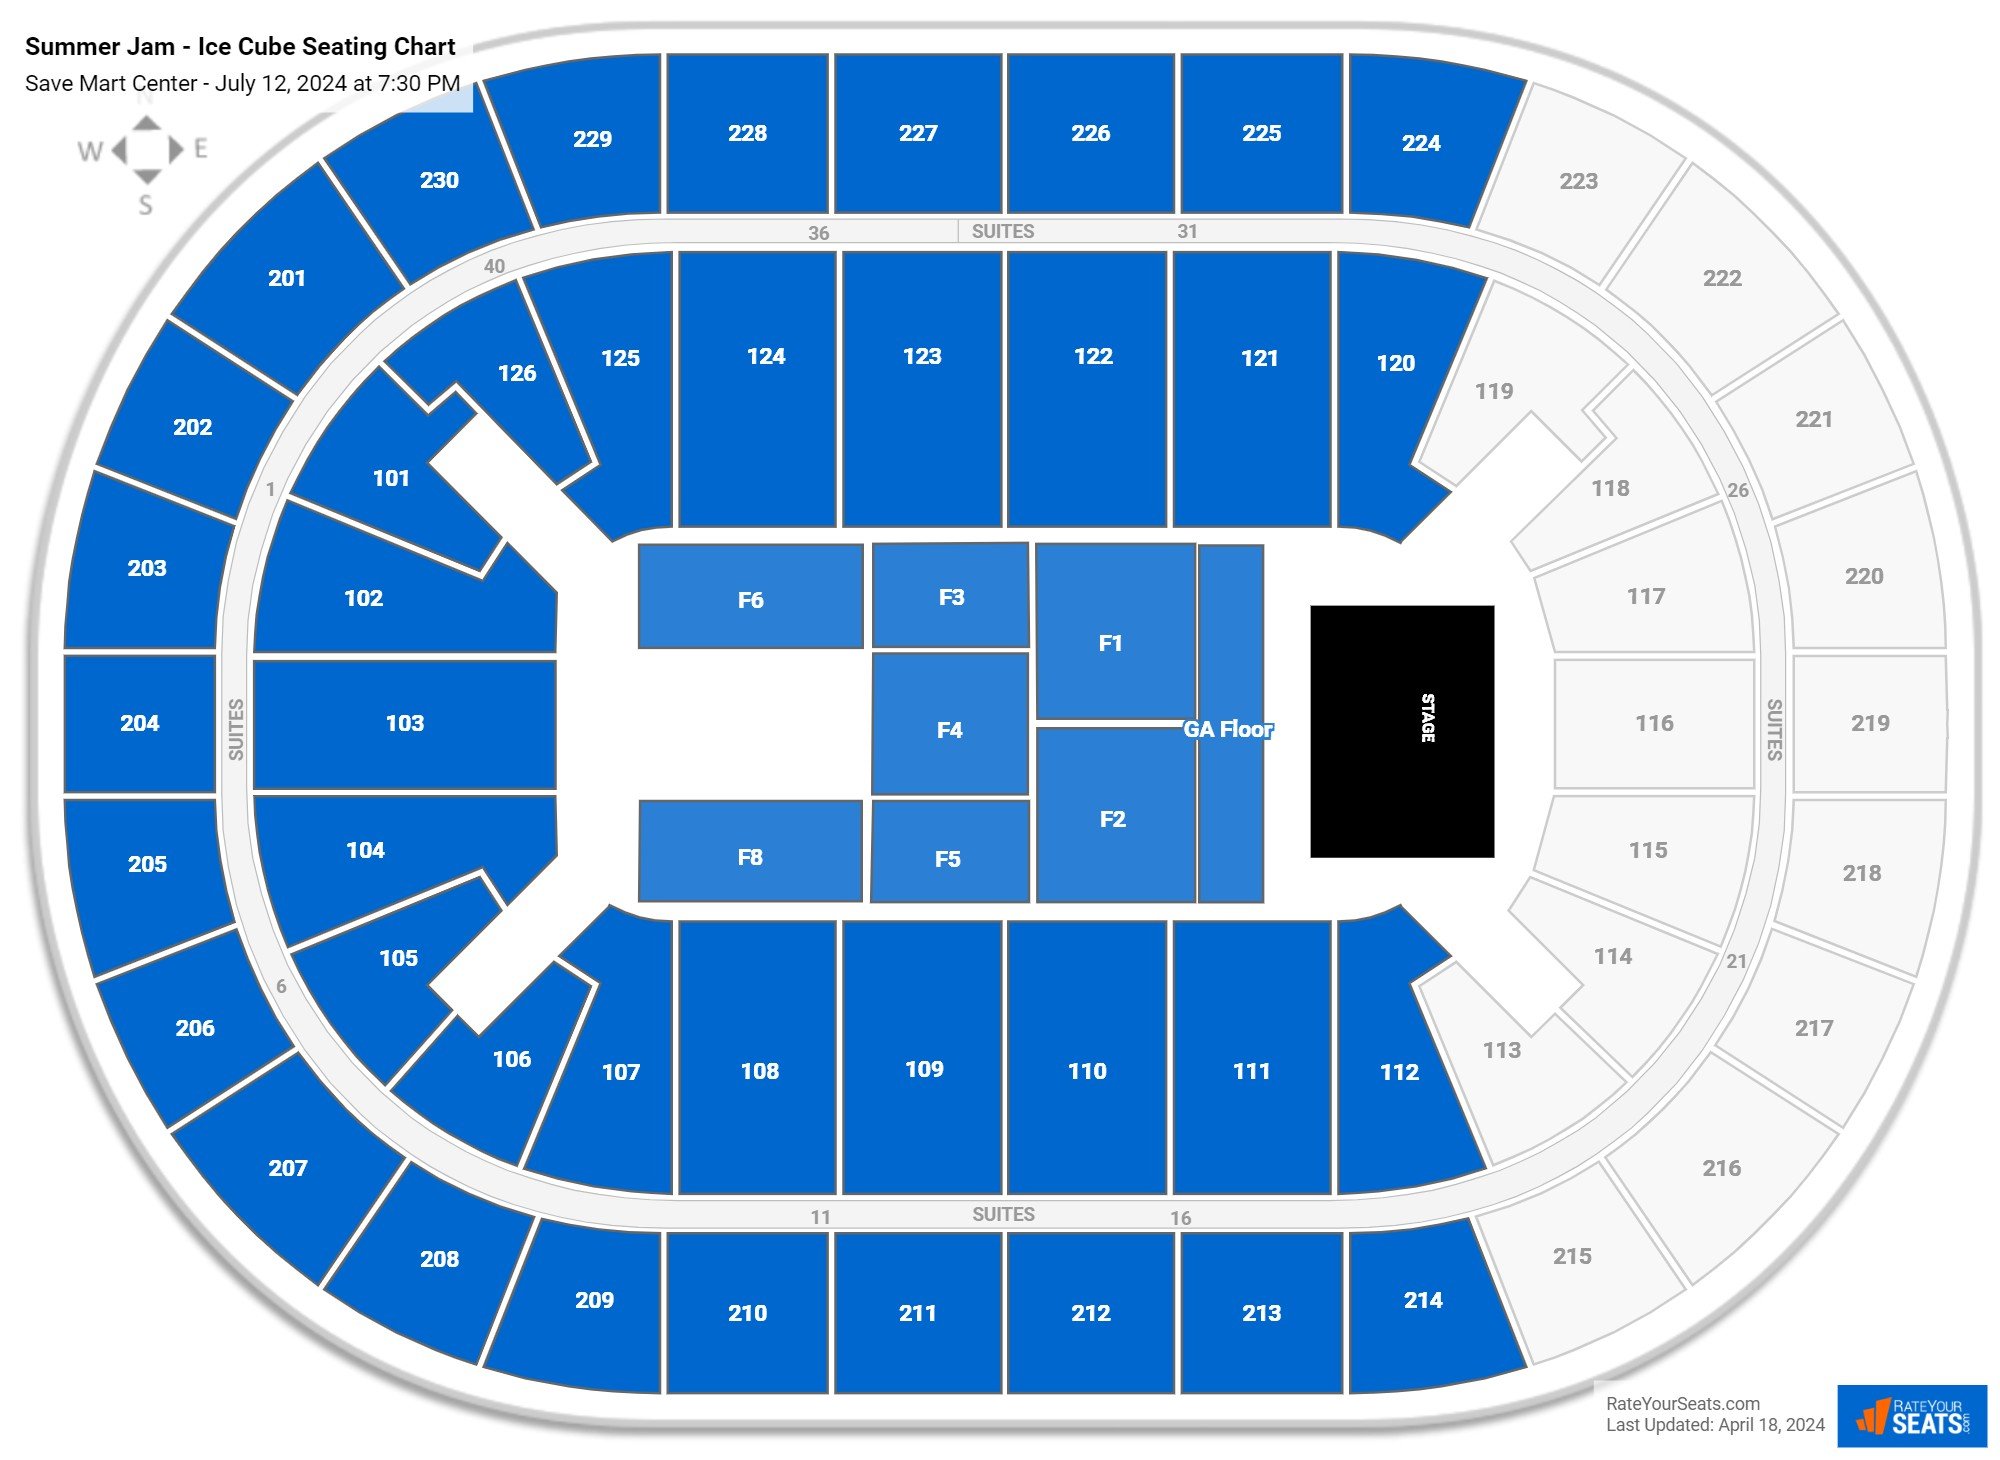 Summer Jam - Ice Cube seating chart Save Mart Center